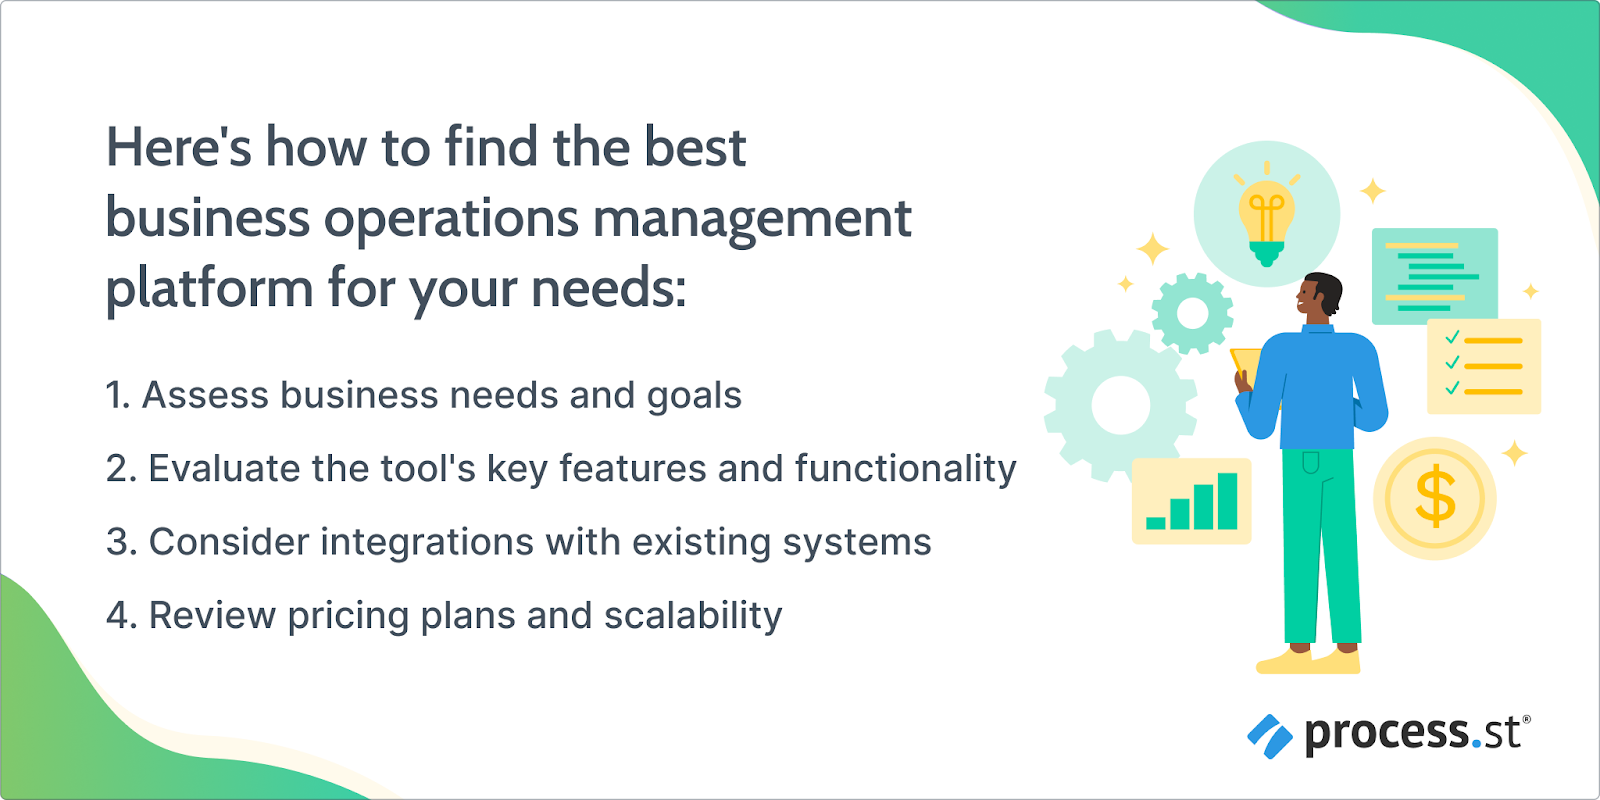 Image showing how to find the best business operations management platform